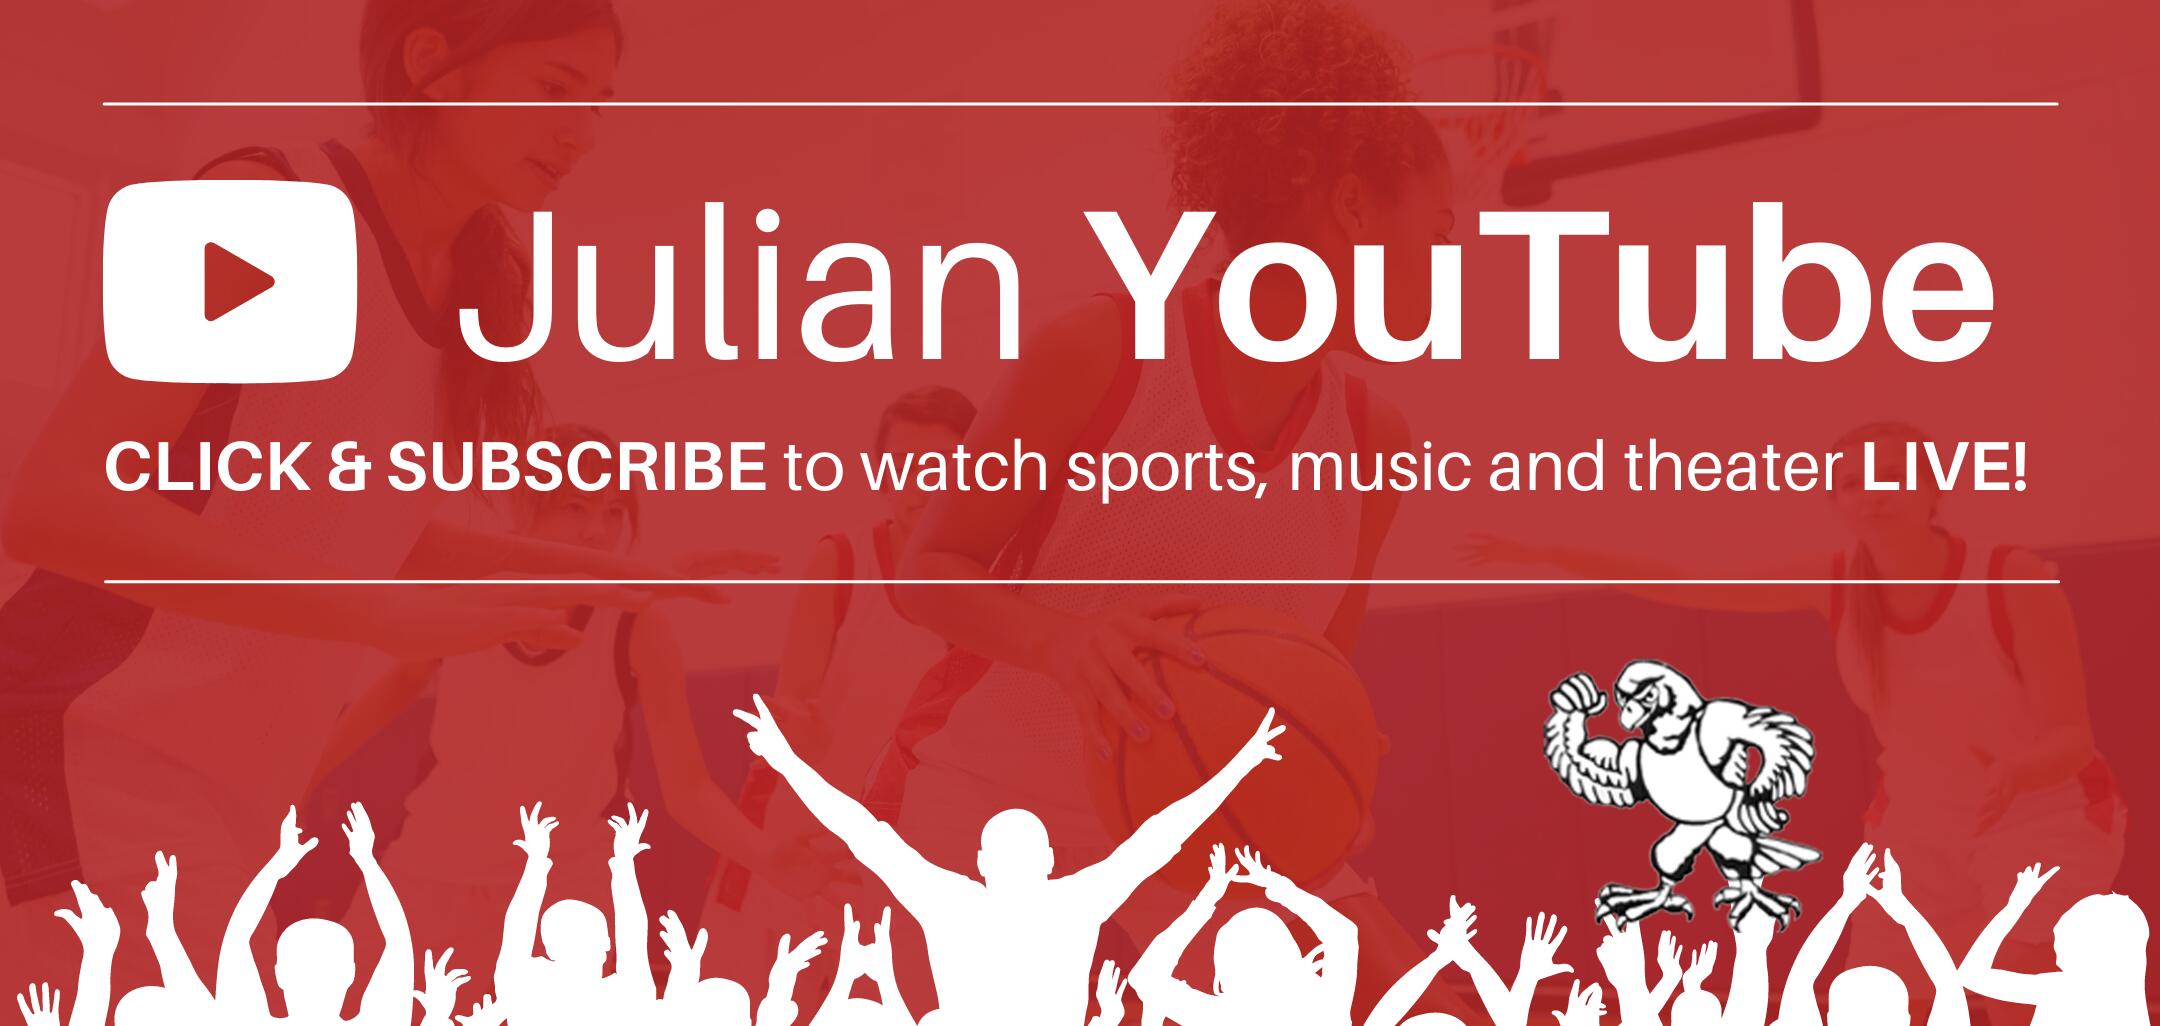 Julian YouTube: Click and subscribe to watch sports, music and theater live!